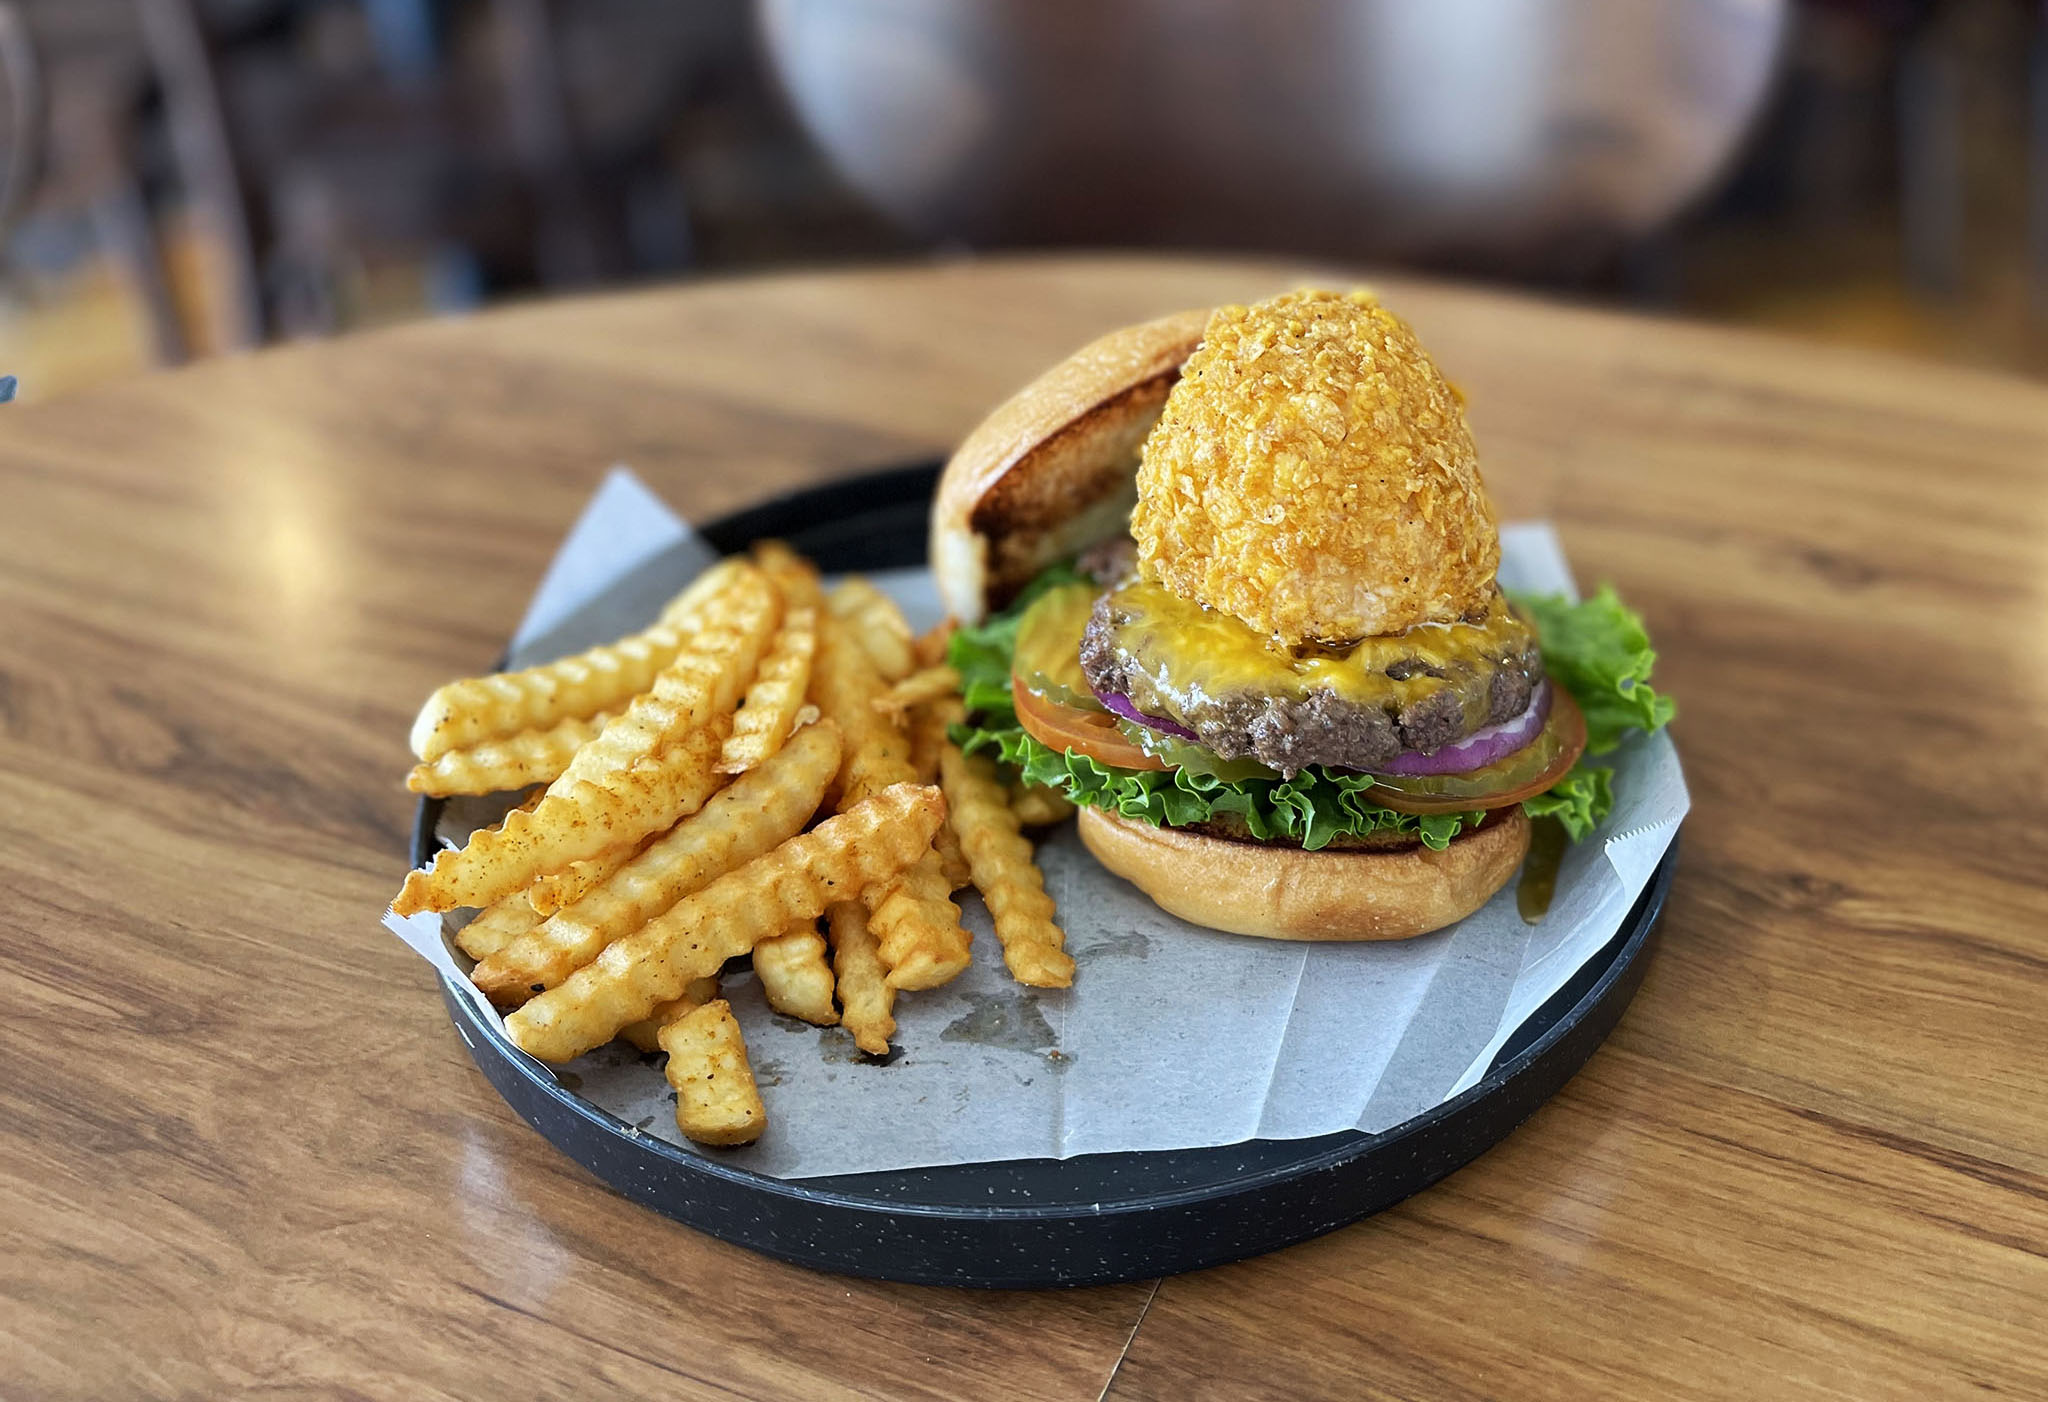 A burger and fries with the burger patty topped with a large scoop of fried ice cream